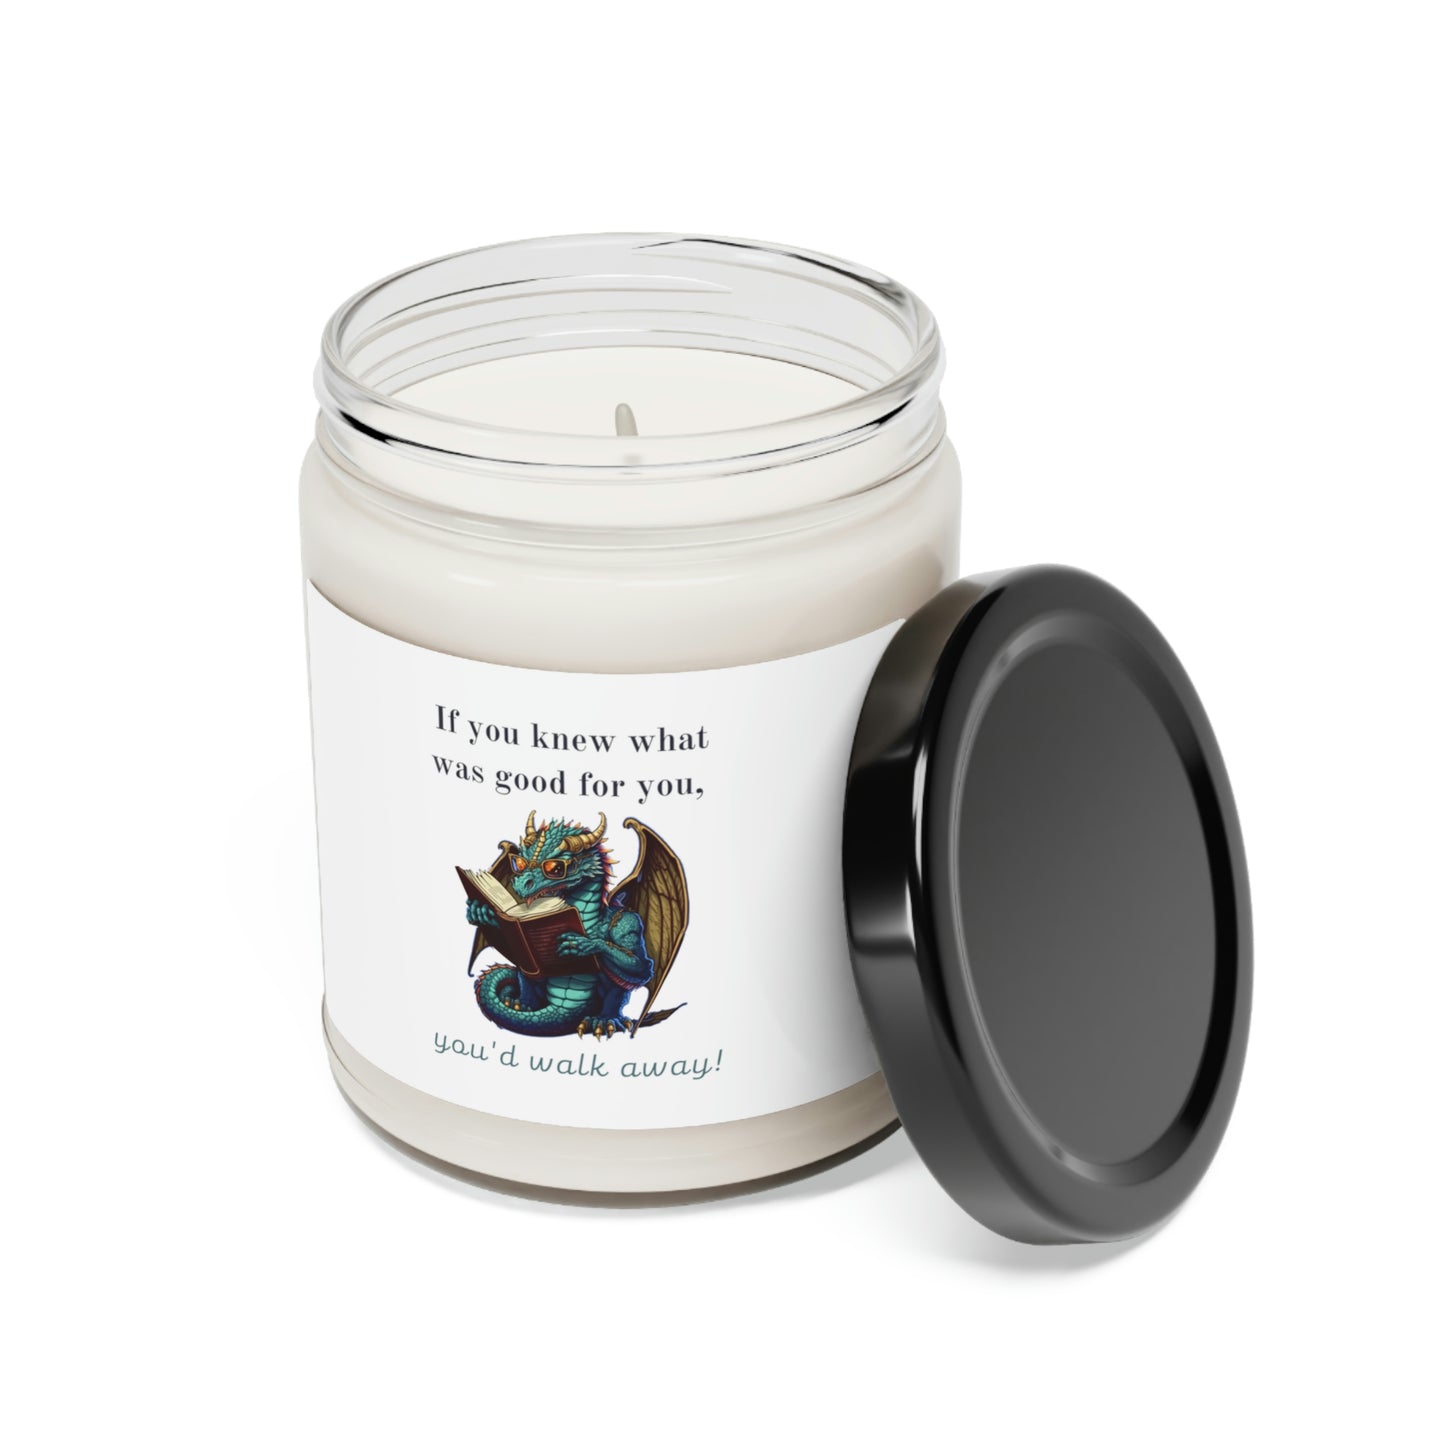 If You Knew What Was Good For You Scented Soy Candle, 9oz